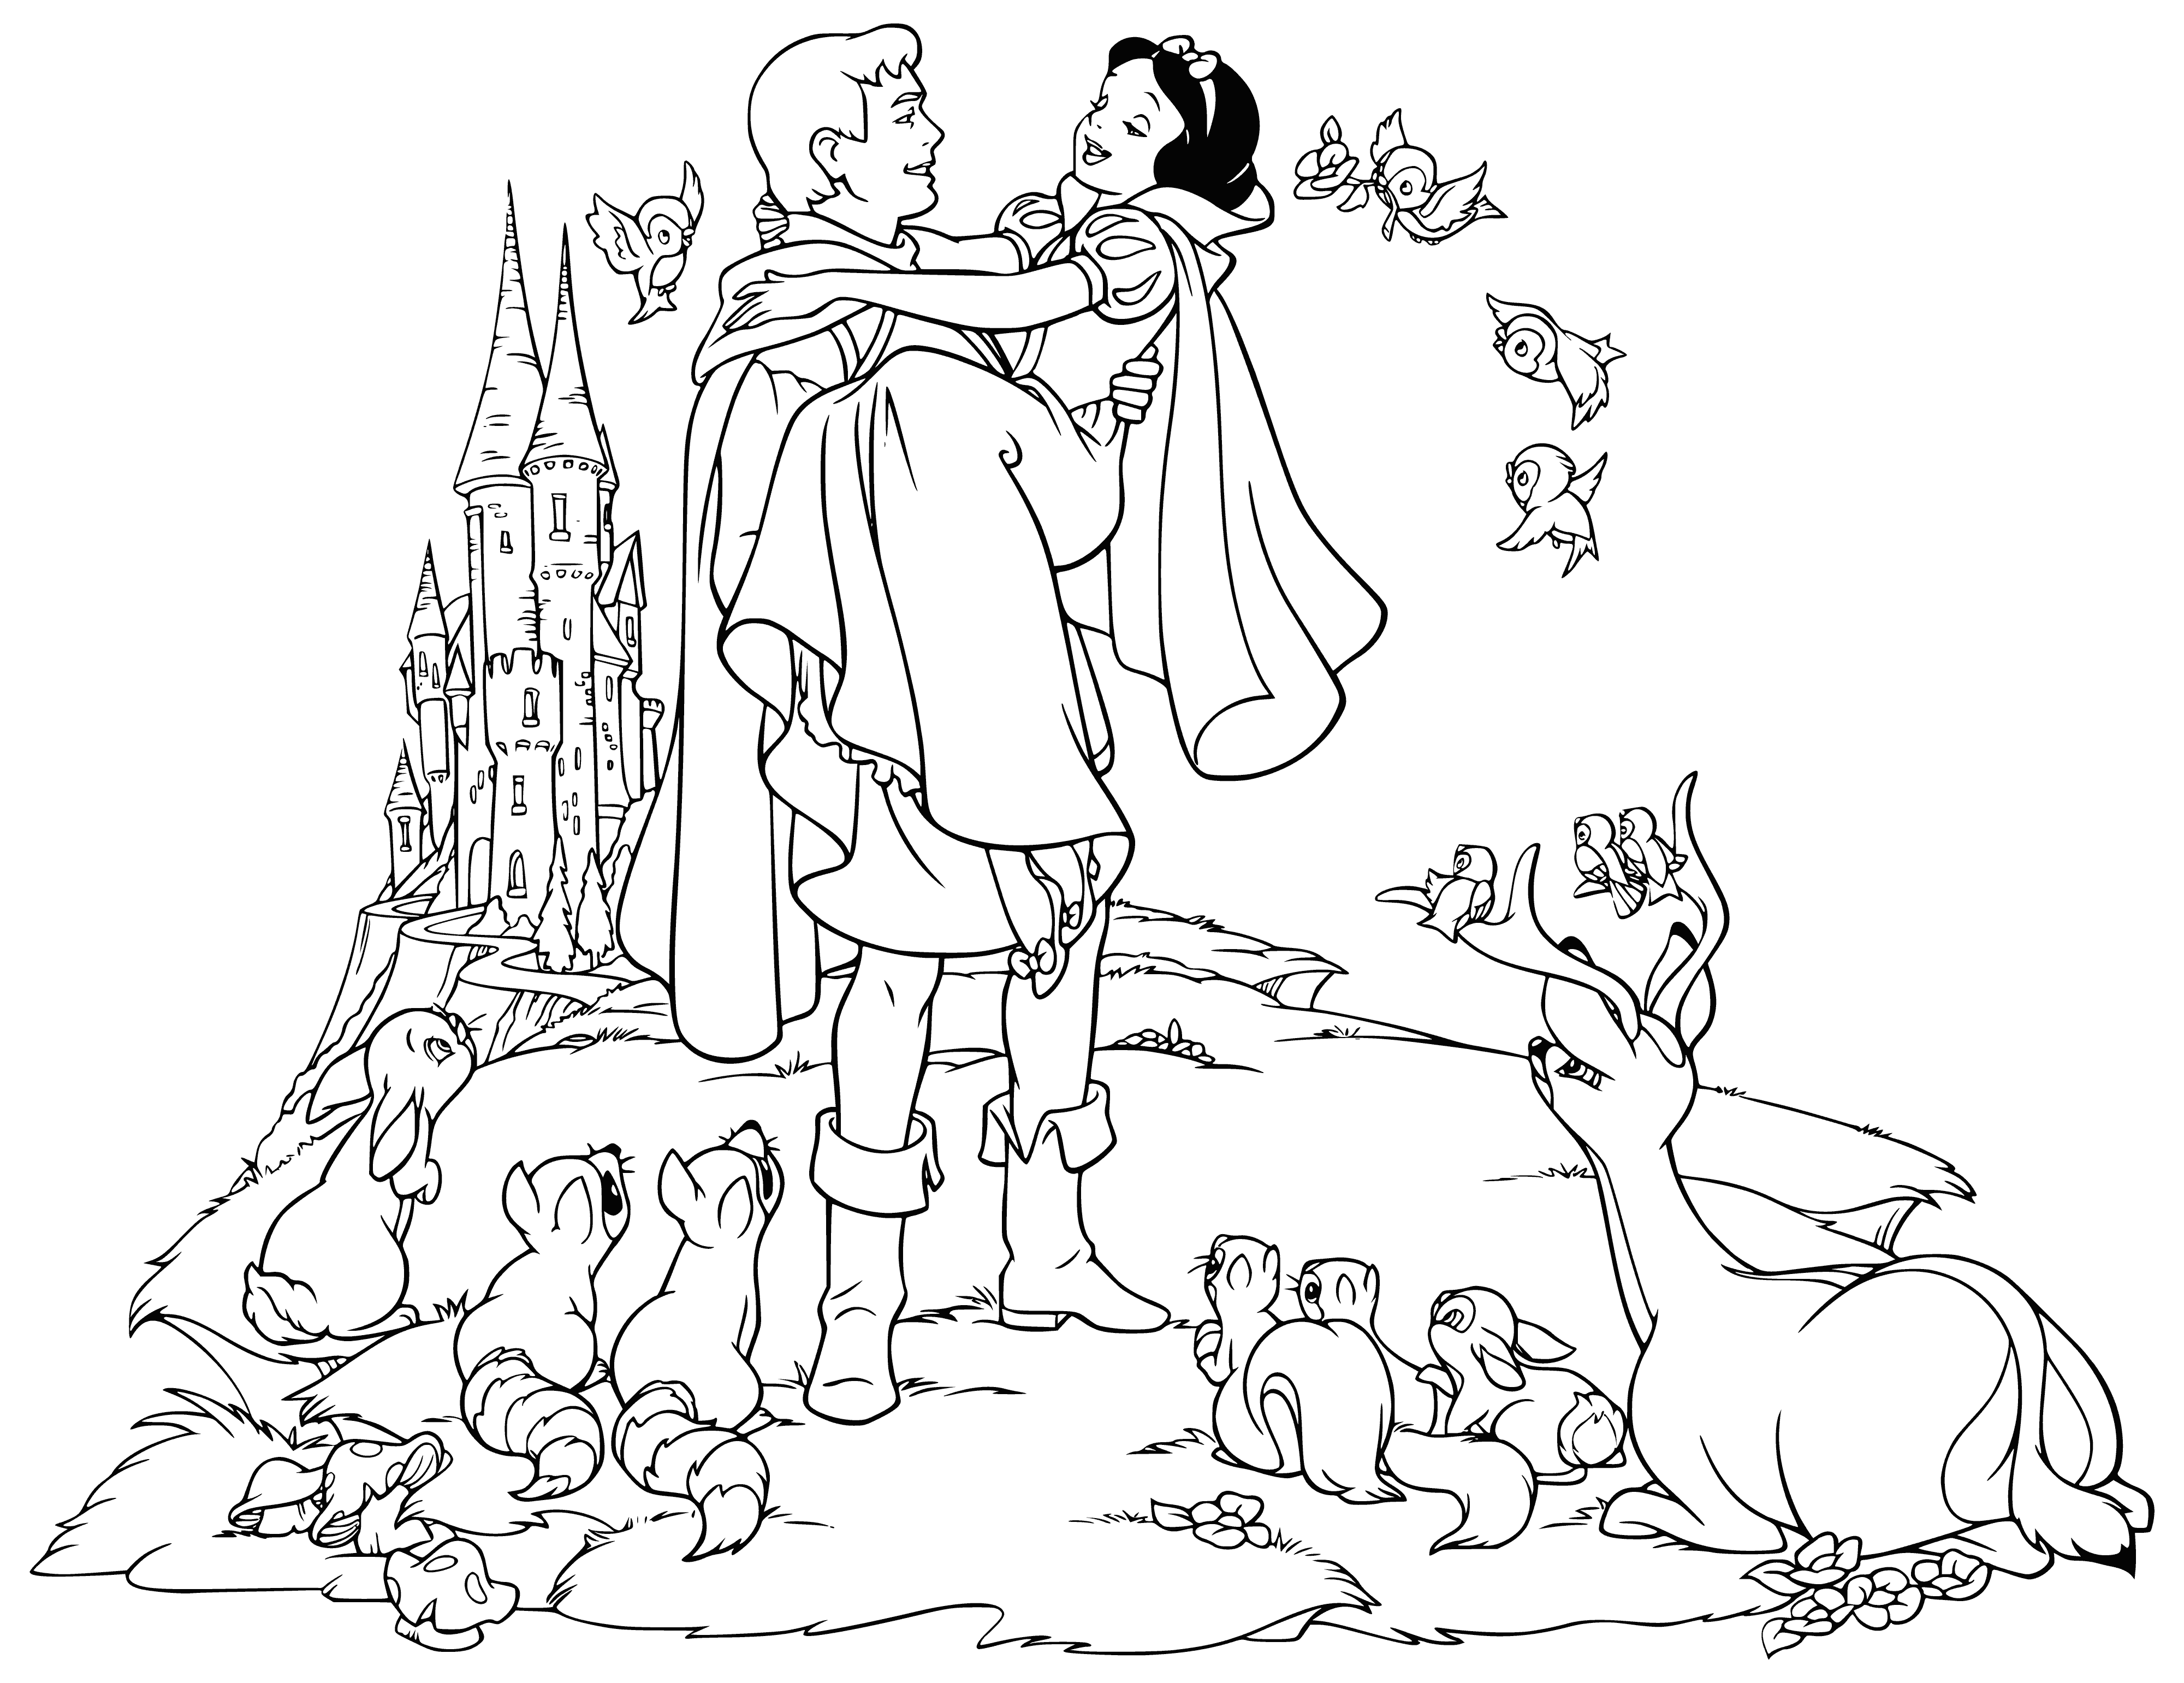 coloring page: The prince is about to kiss Snow White, who stands on a stool with arms around his neck wearing a yellow dress with black belt and shoes. Her dark, curly hair and a red apple in her hand are flanked by the approving dwarfs.